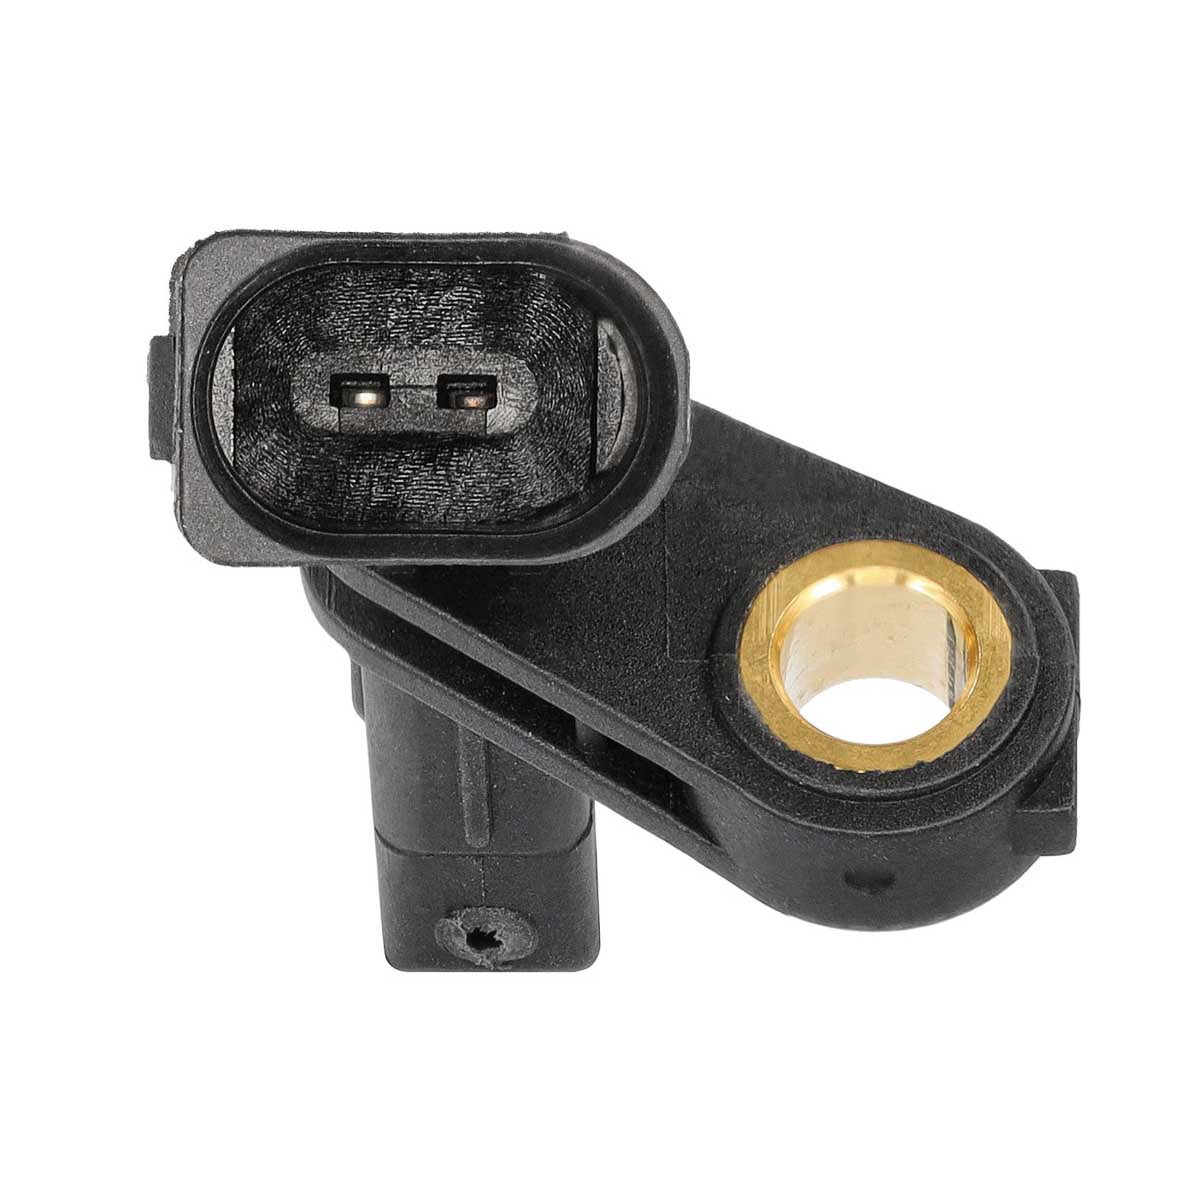 MEYLE 1008990042 ABS sensor without cable, ORIGINAL Quality, Active sensor, 2-pin connector